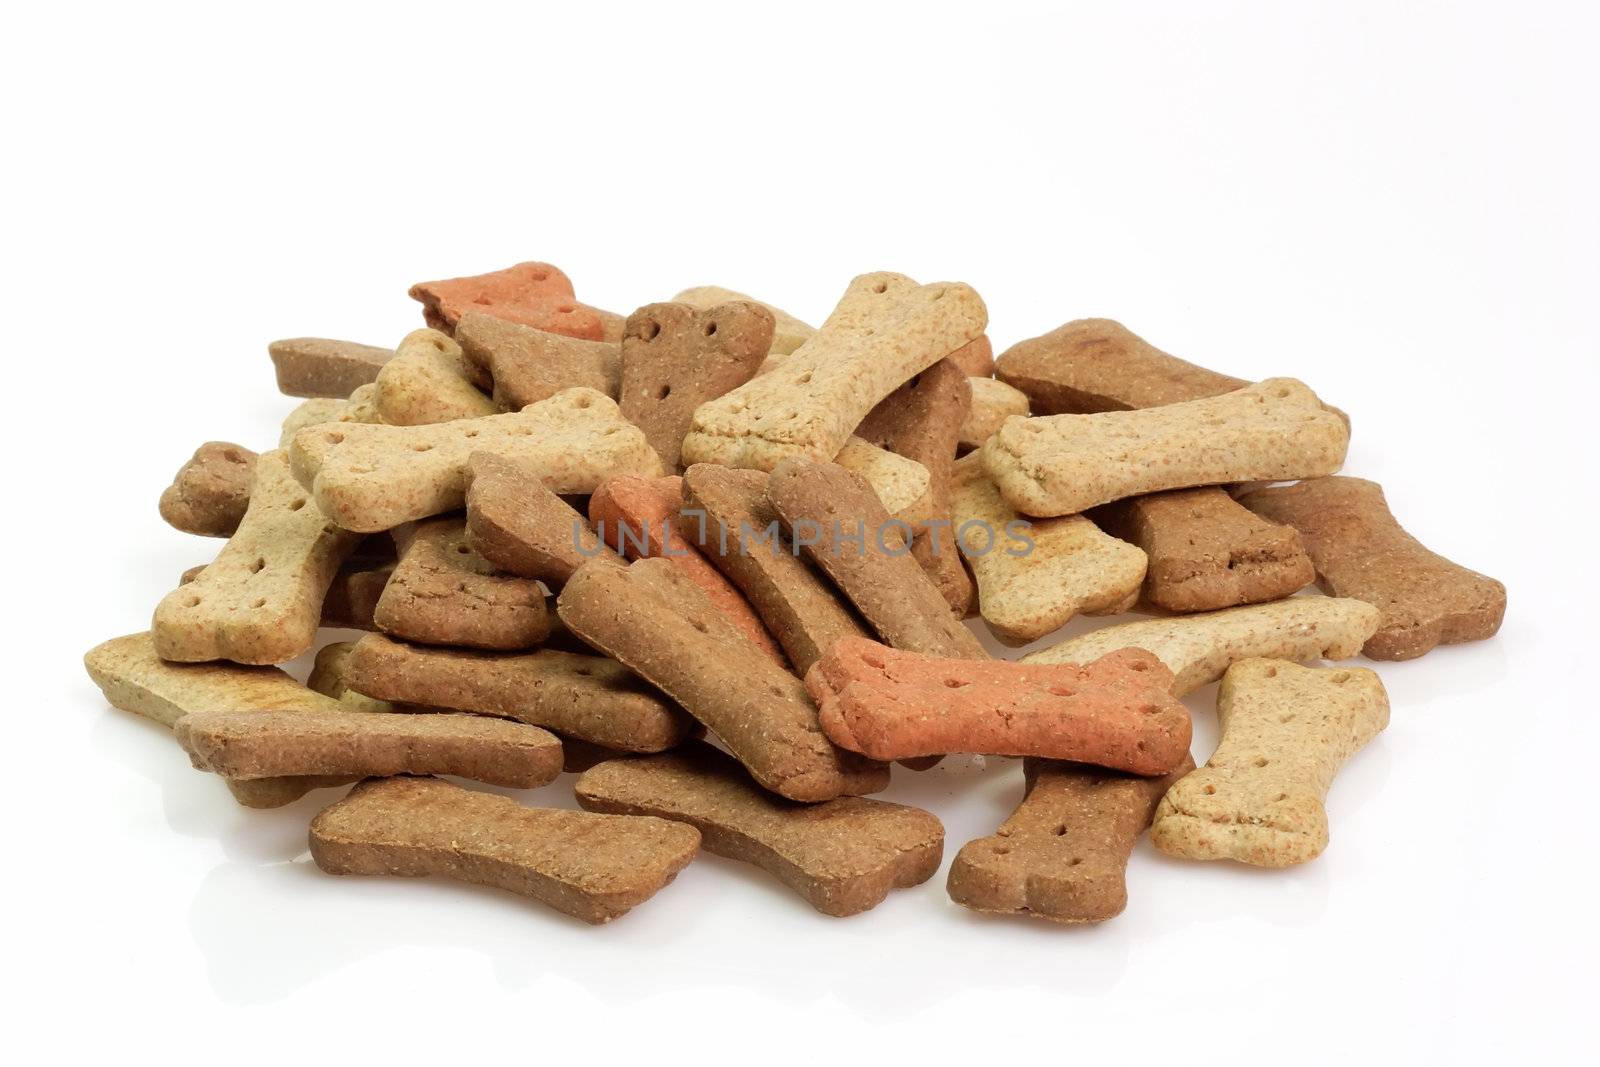 Dry dog food on bright background